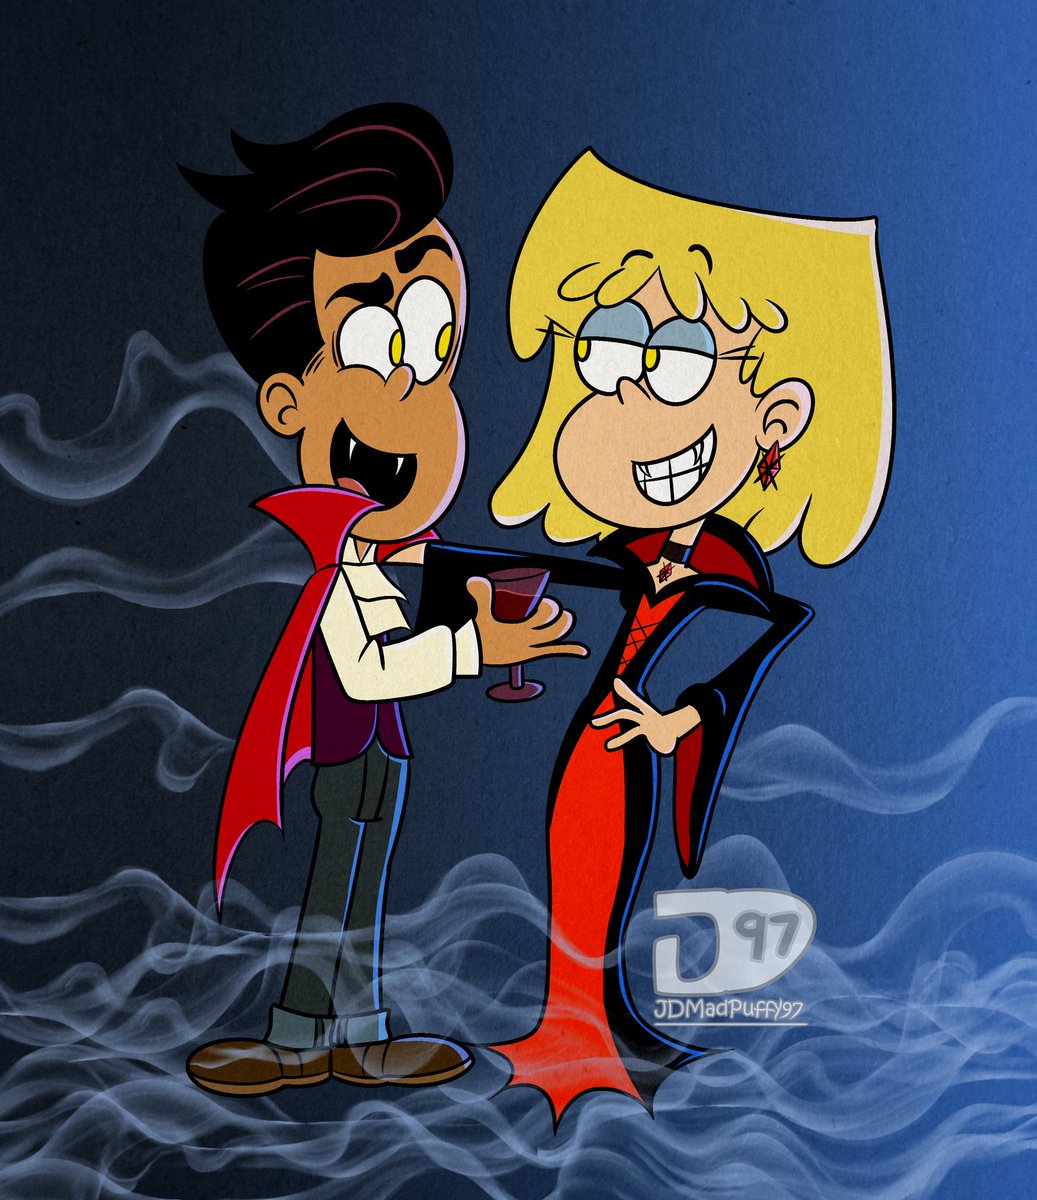 A better Vampire Couple than Twilight! :P

#TheLoudHouse #TheCasagrandes #Nickelodeon #LoriLoud #BobbySantiago #Lobby #Bori #Halloween #Vampires #loudhouse #tlh